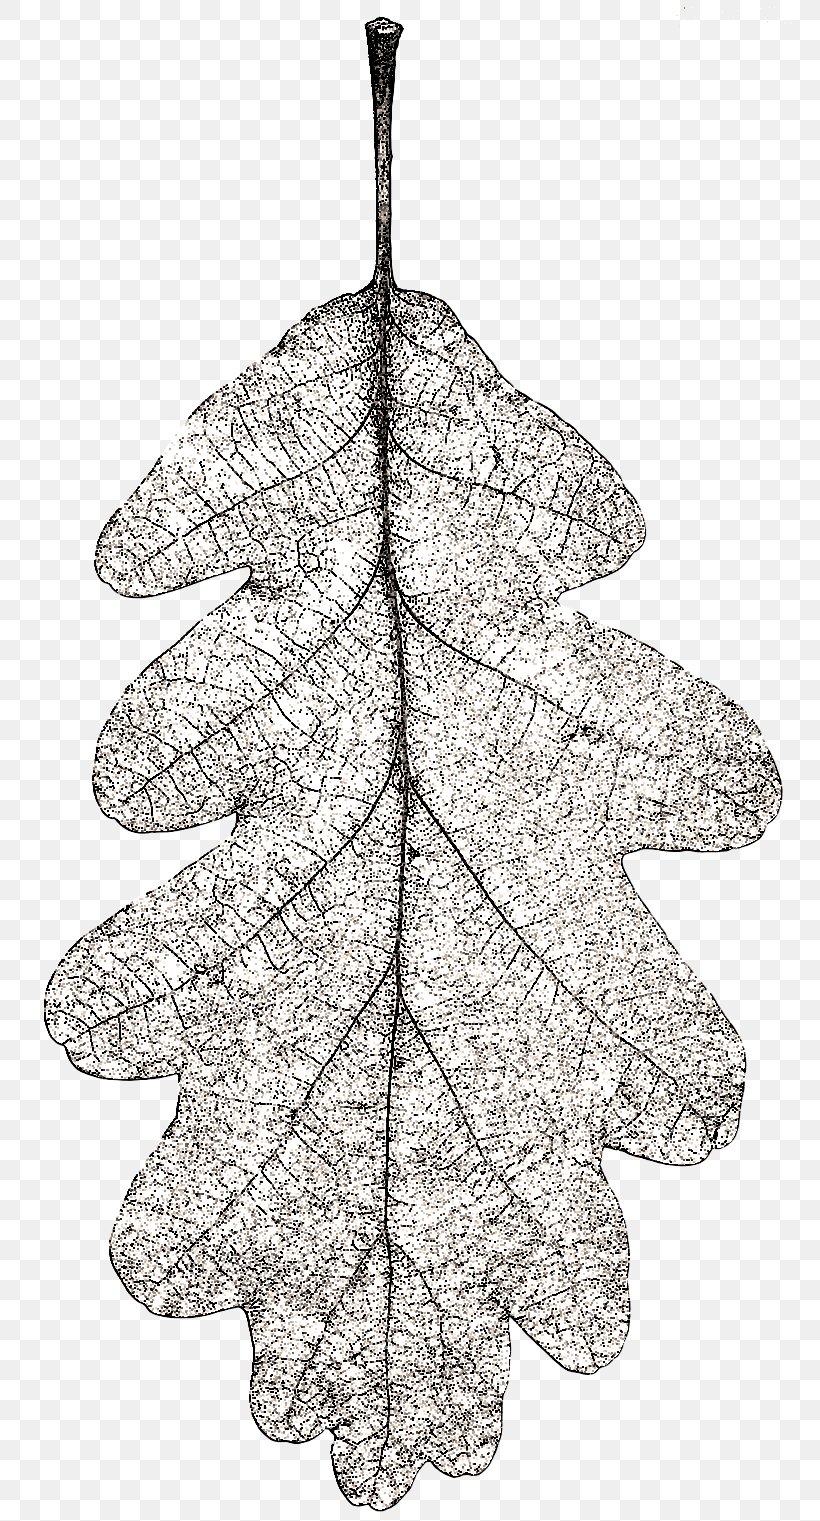 Pine Christmas Ornament Twig Leaf, PNG, 770x1521px, Pine, Black And White, Christmas, Christmas Ornament, Conifer Download Free